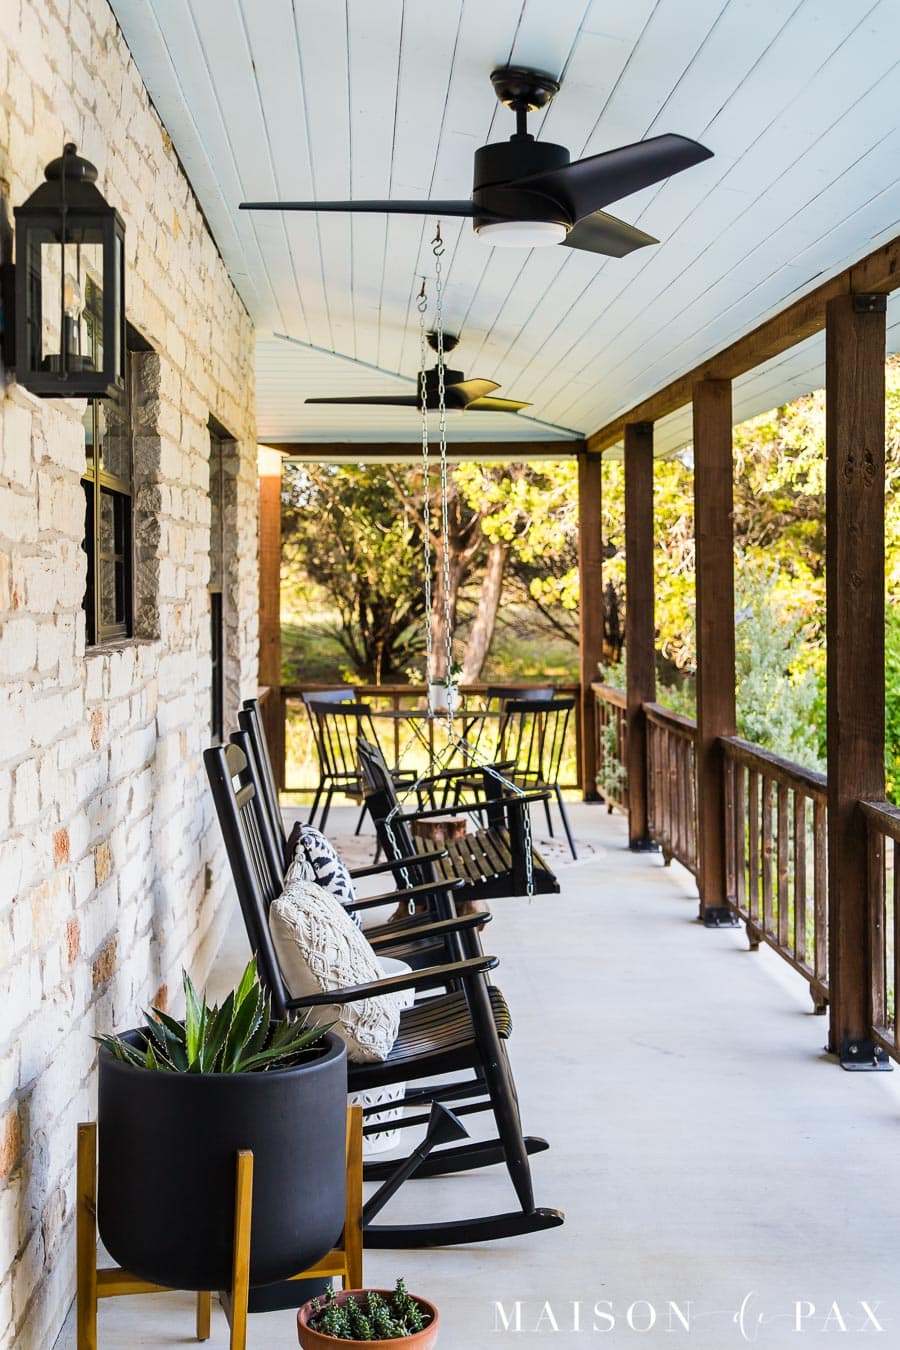 front porch with haint blue ceiling, outdoor fans, and rocking chairs | maison de pax